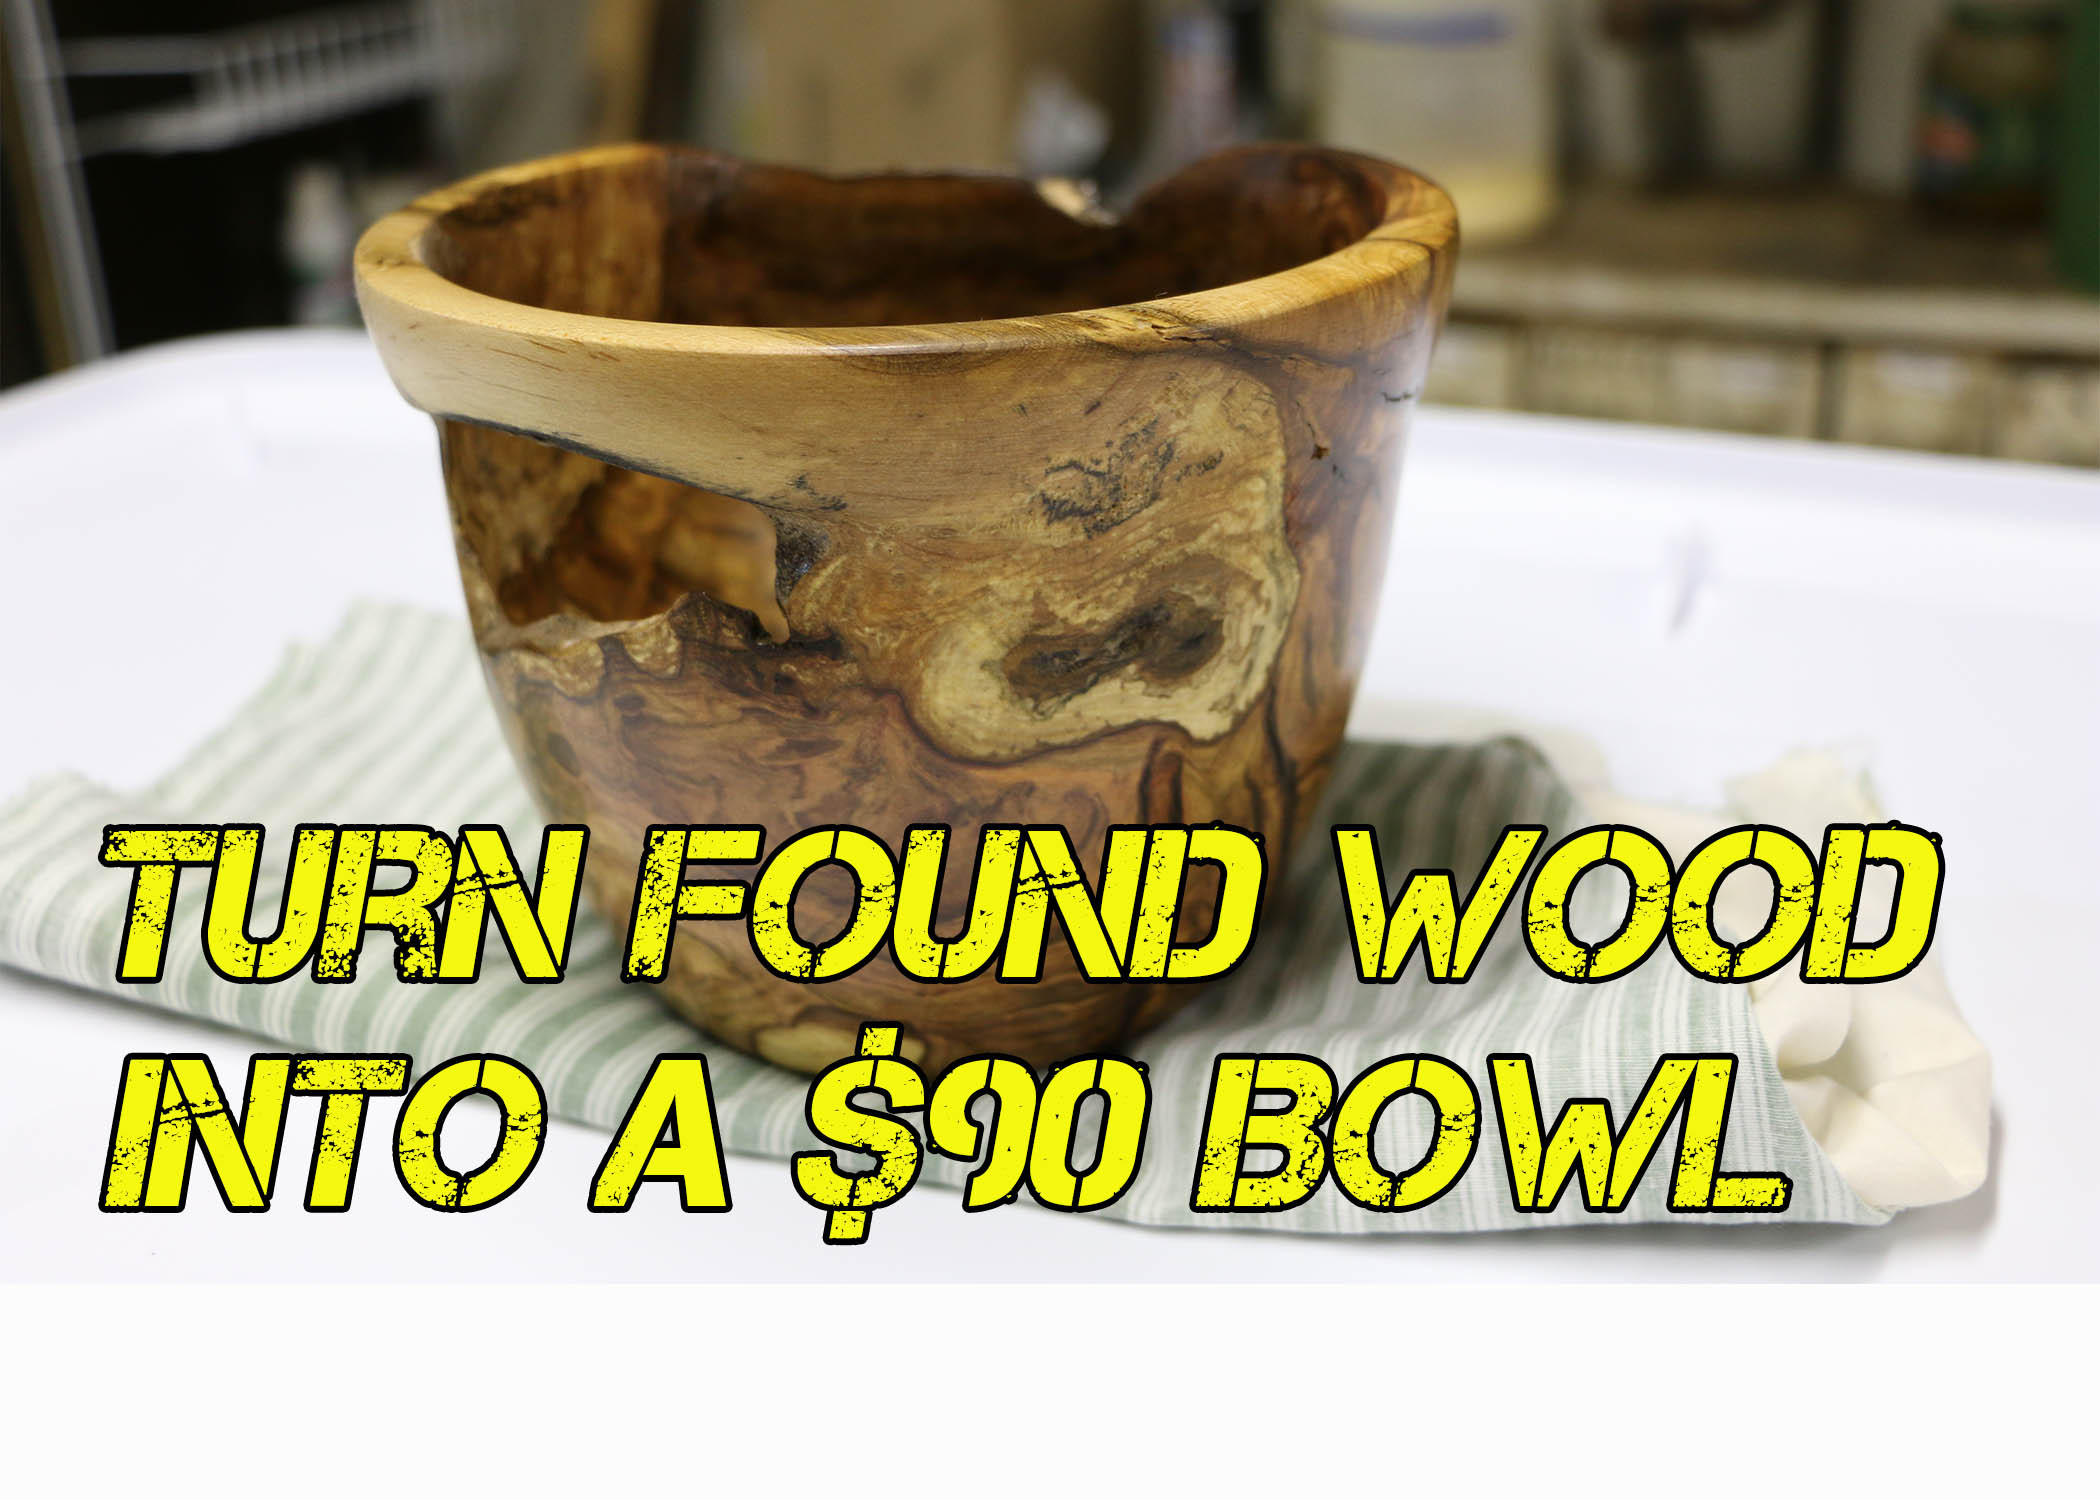 DIY Wooden Bowl
 $90 wooden bowl made from firewood Jeff s DIY Projects